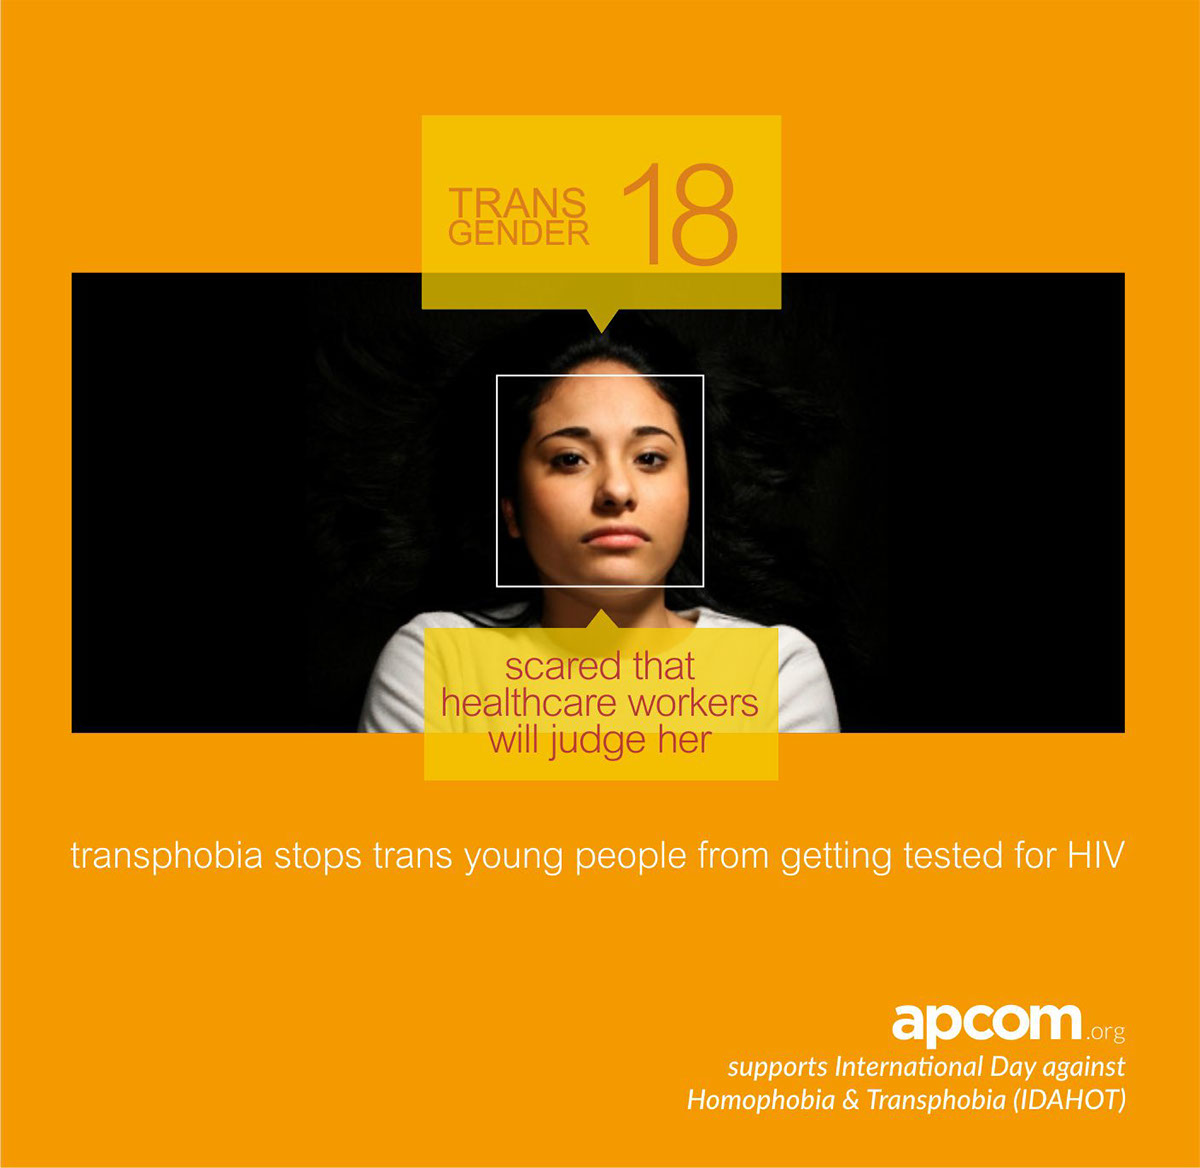 IDAHOT LGBT gay transgender youth homophobia transphobia day against homophobia howoldrobot Meme young people asia pacific